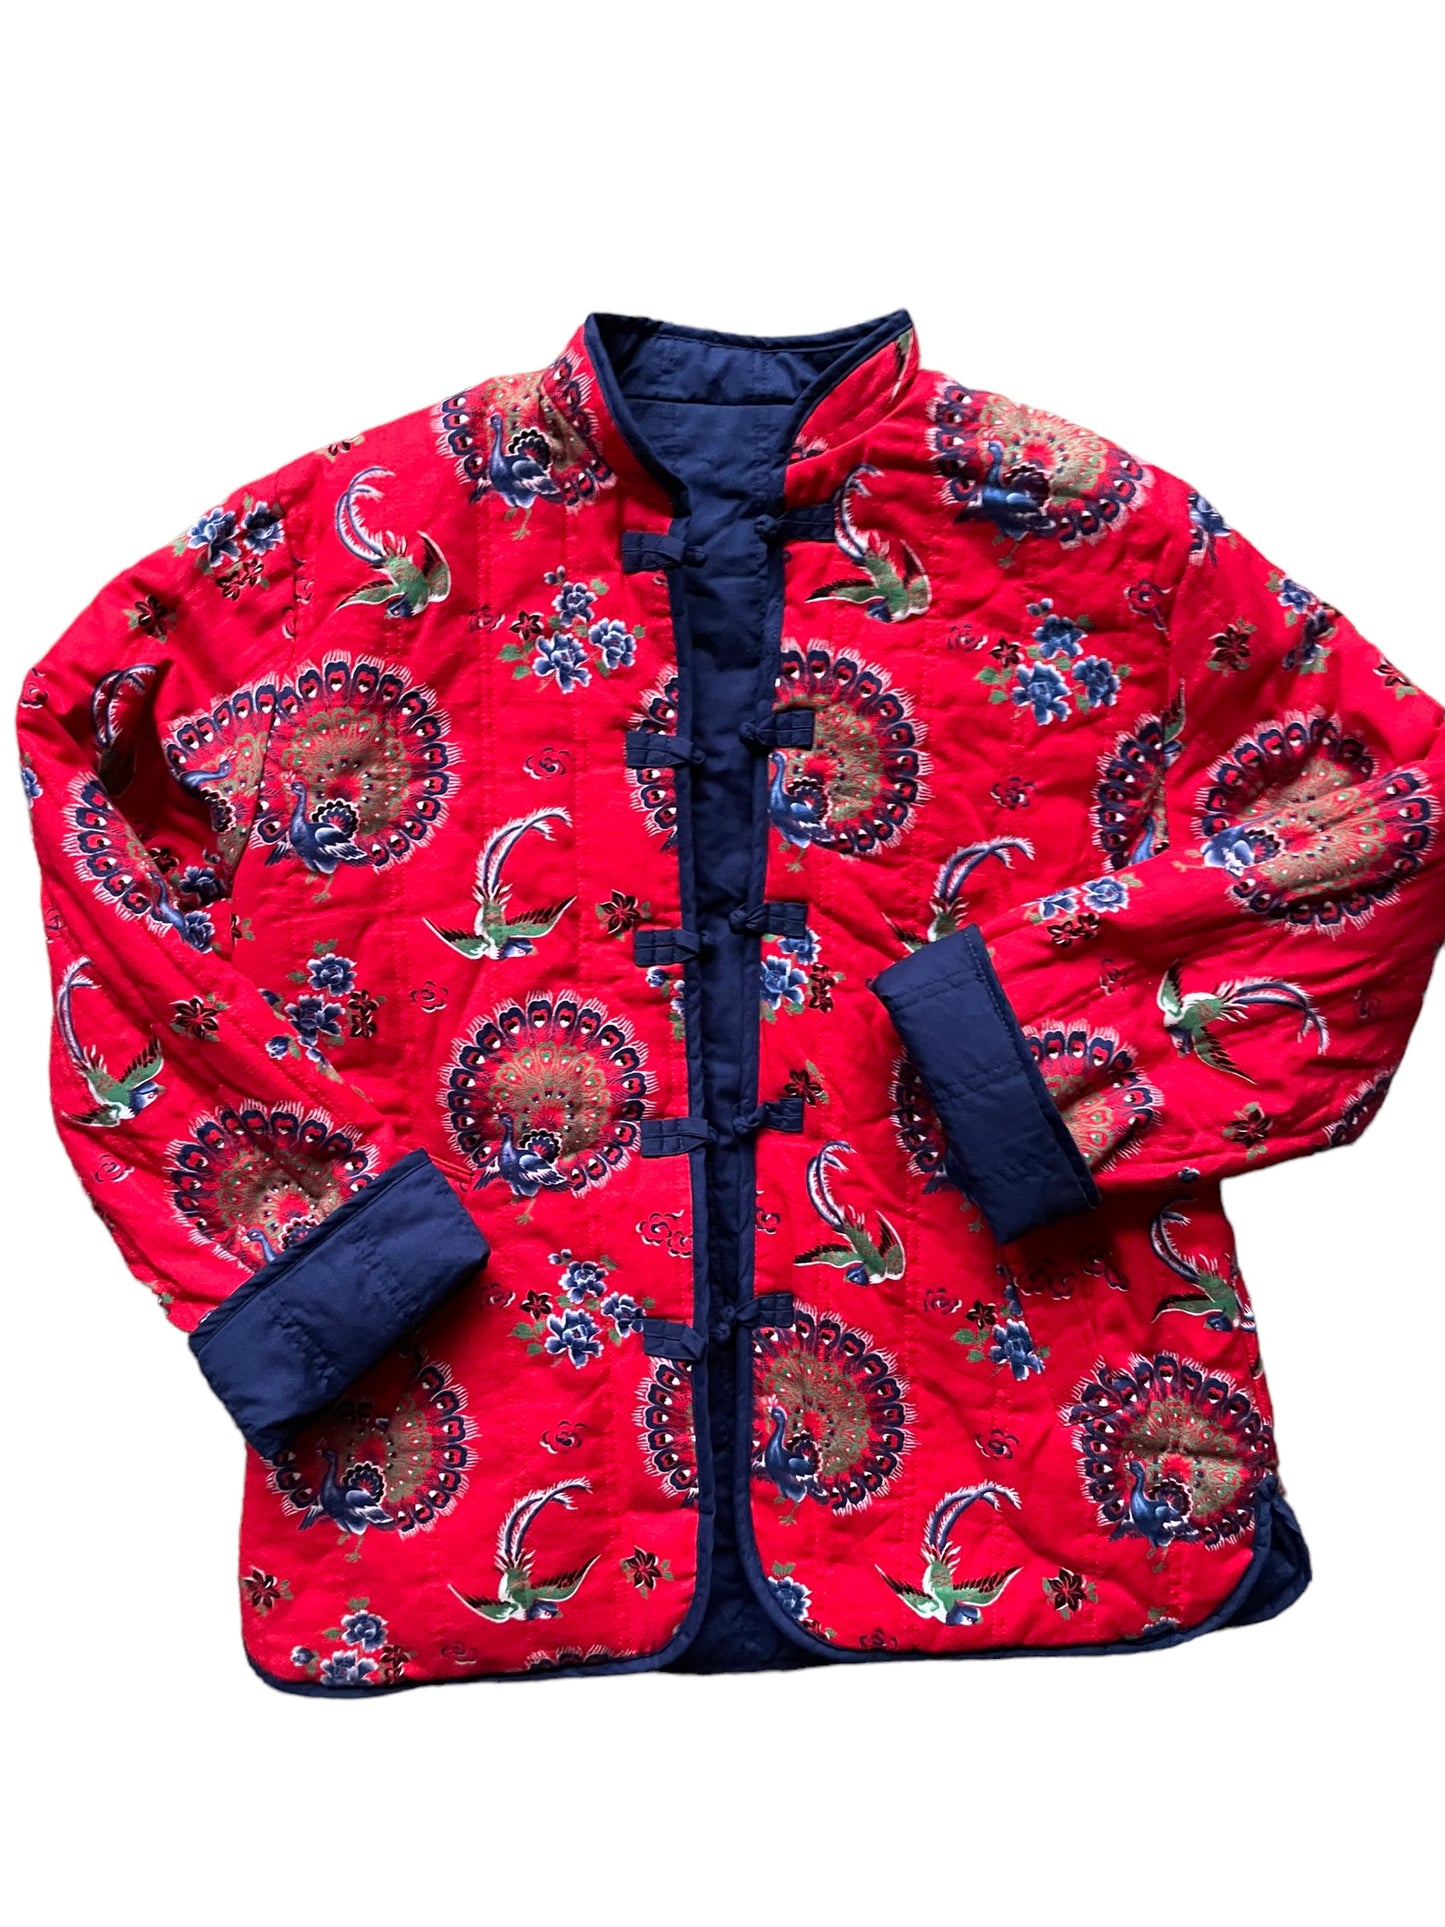 Full front  red side of Quilted Reversible Cheongsam Style Jacket SZ L-XL | Seattle Vintage Jackets | Barn Owl Vintage